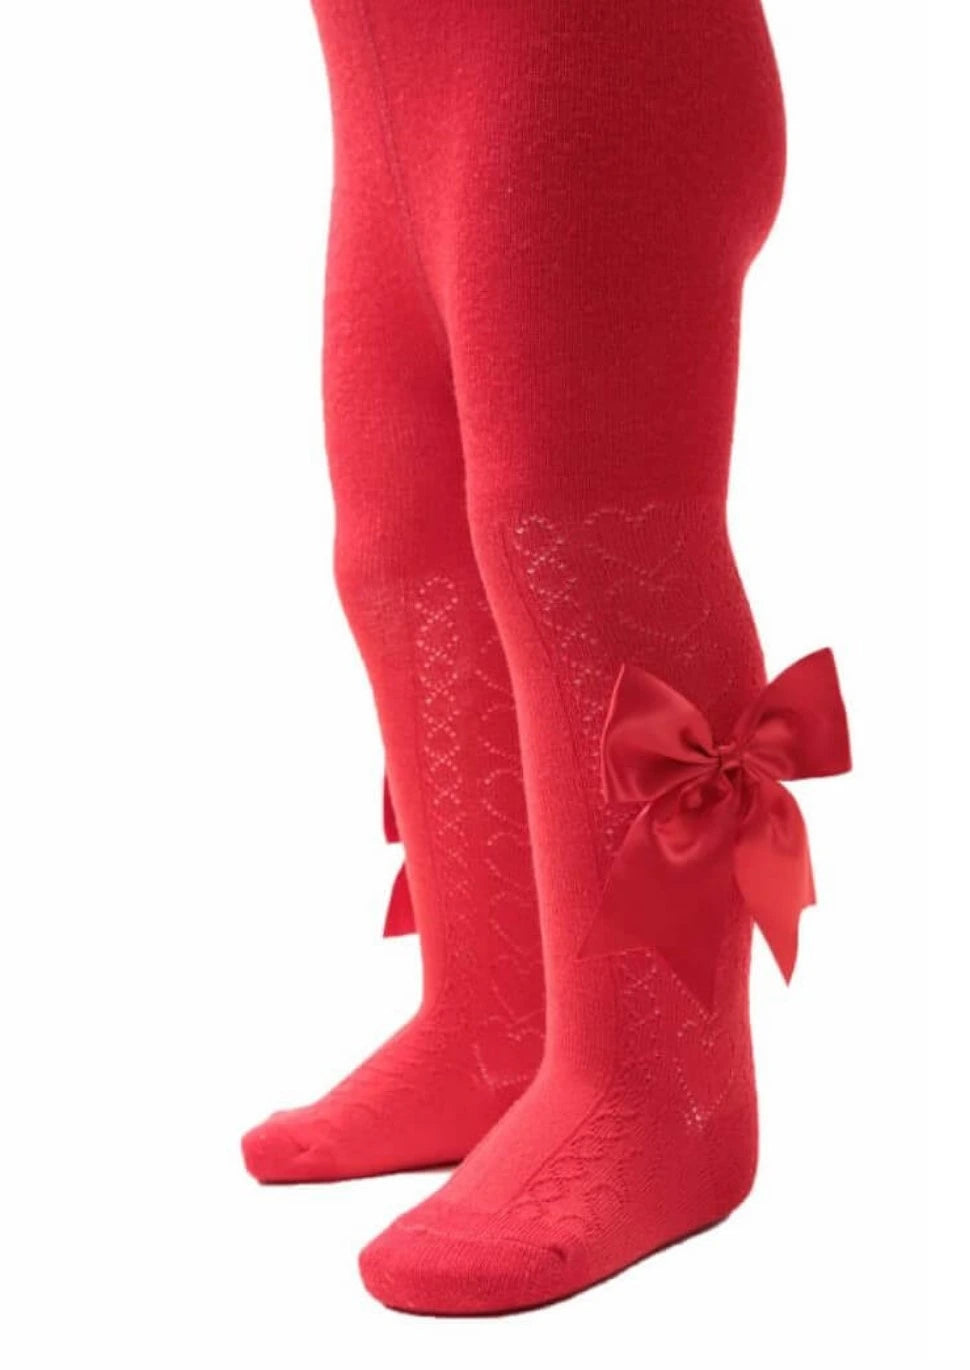 red ankle bow socks from tors childrens wear